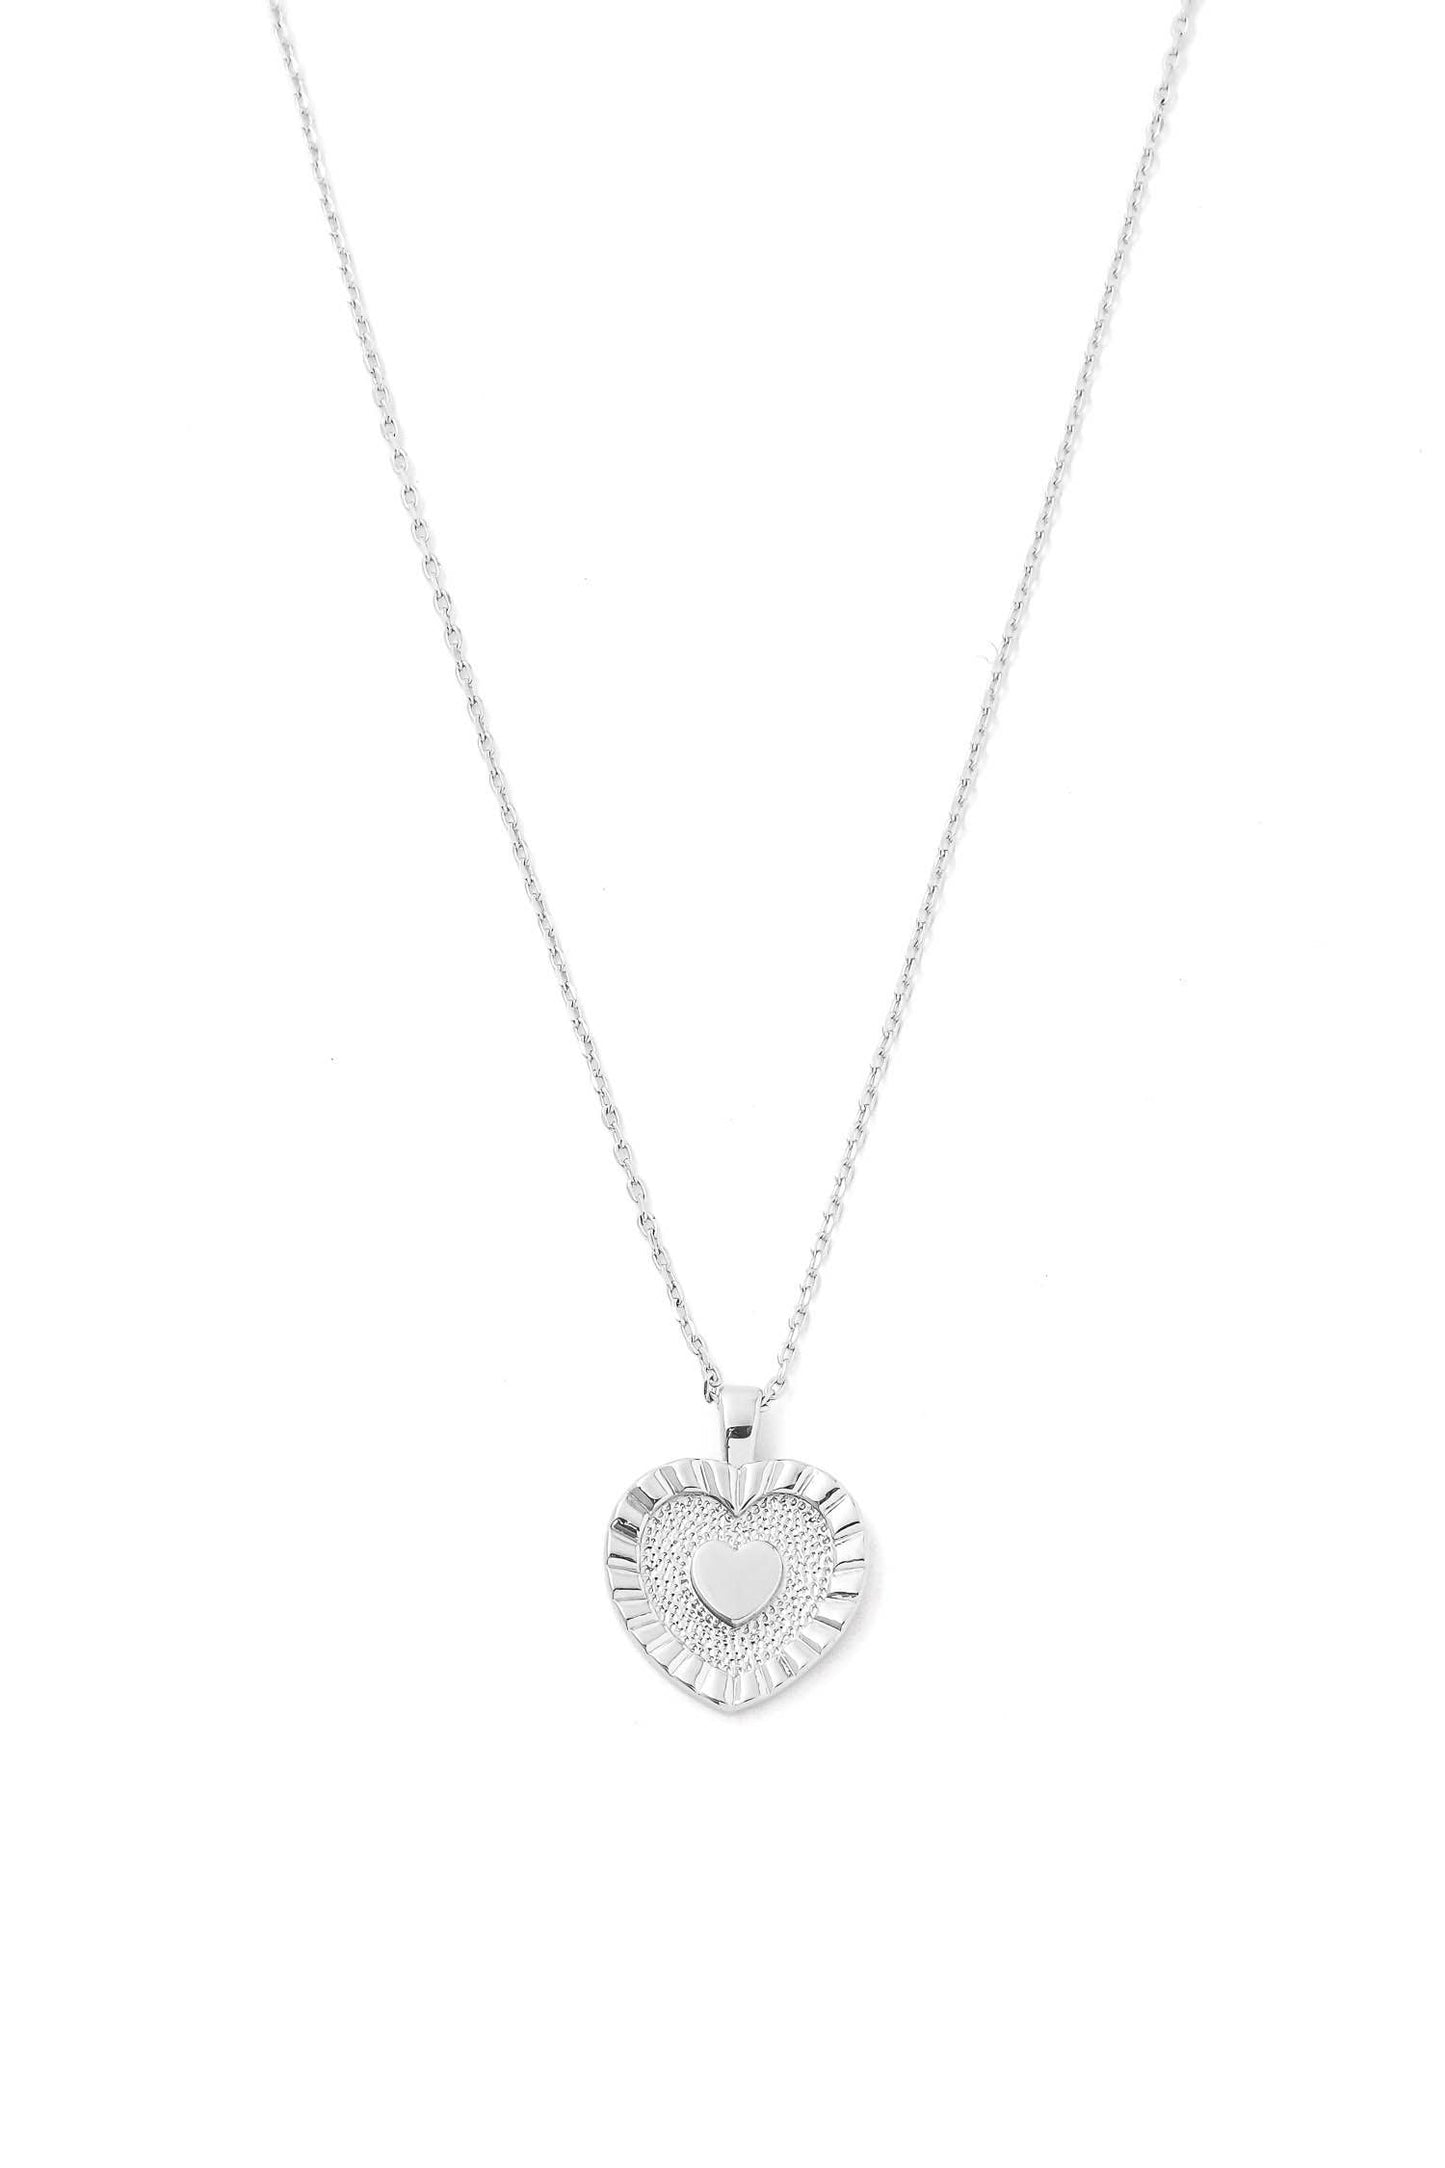 Layered Heart Pendant Necklace